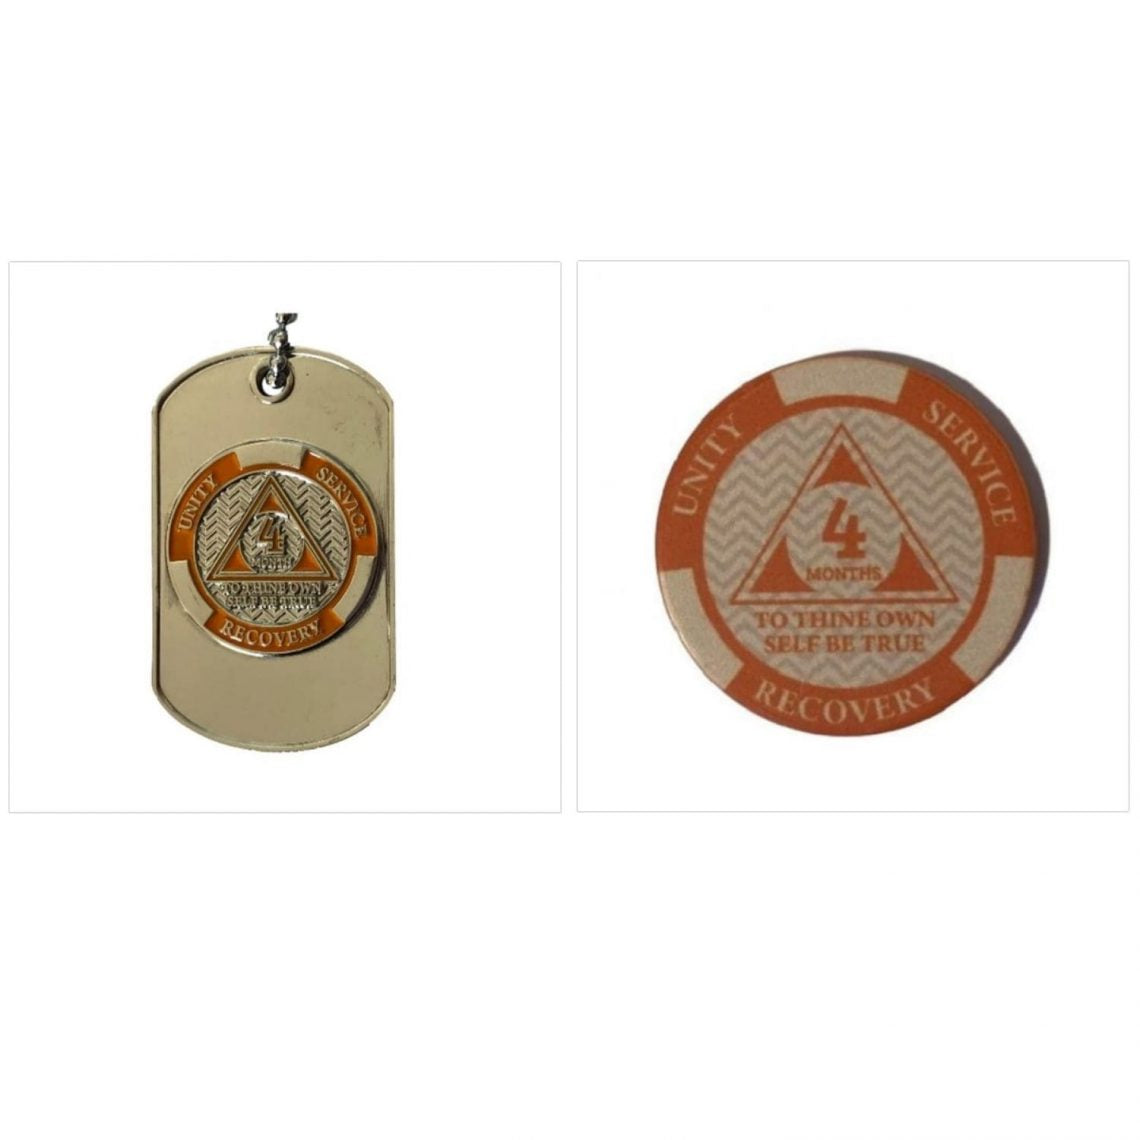 AA Monthly Sobriety Dog Tag with Chip